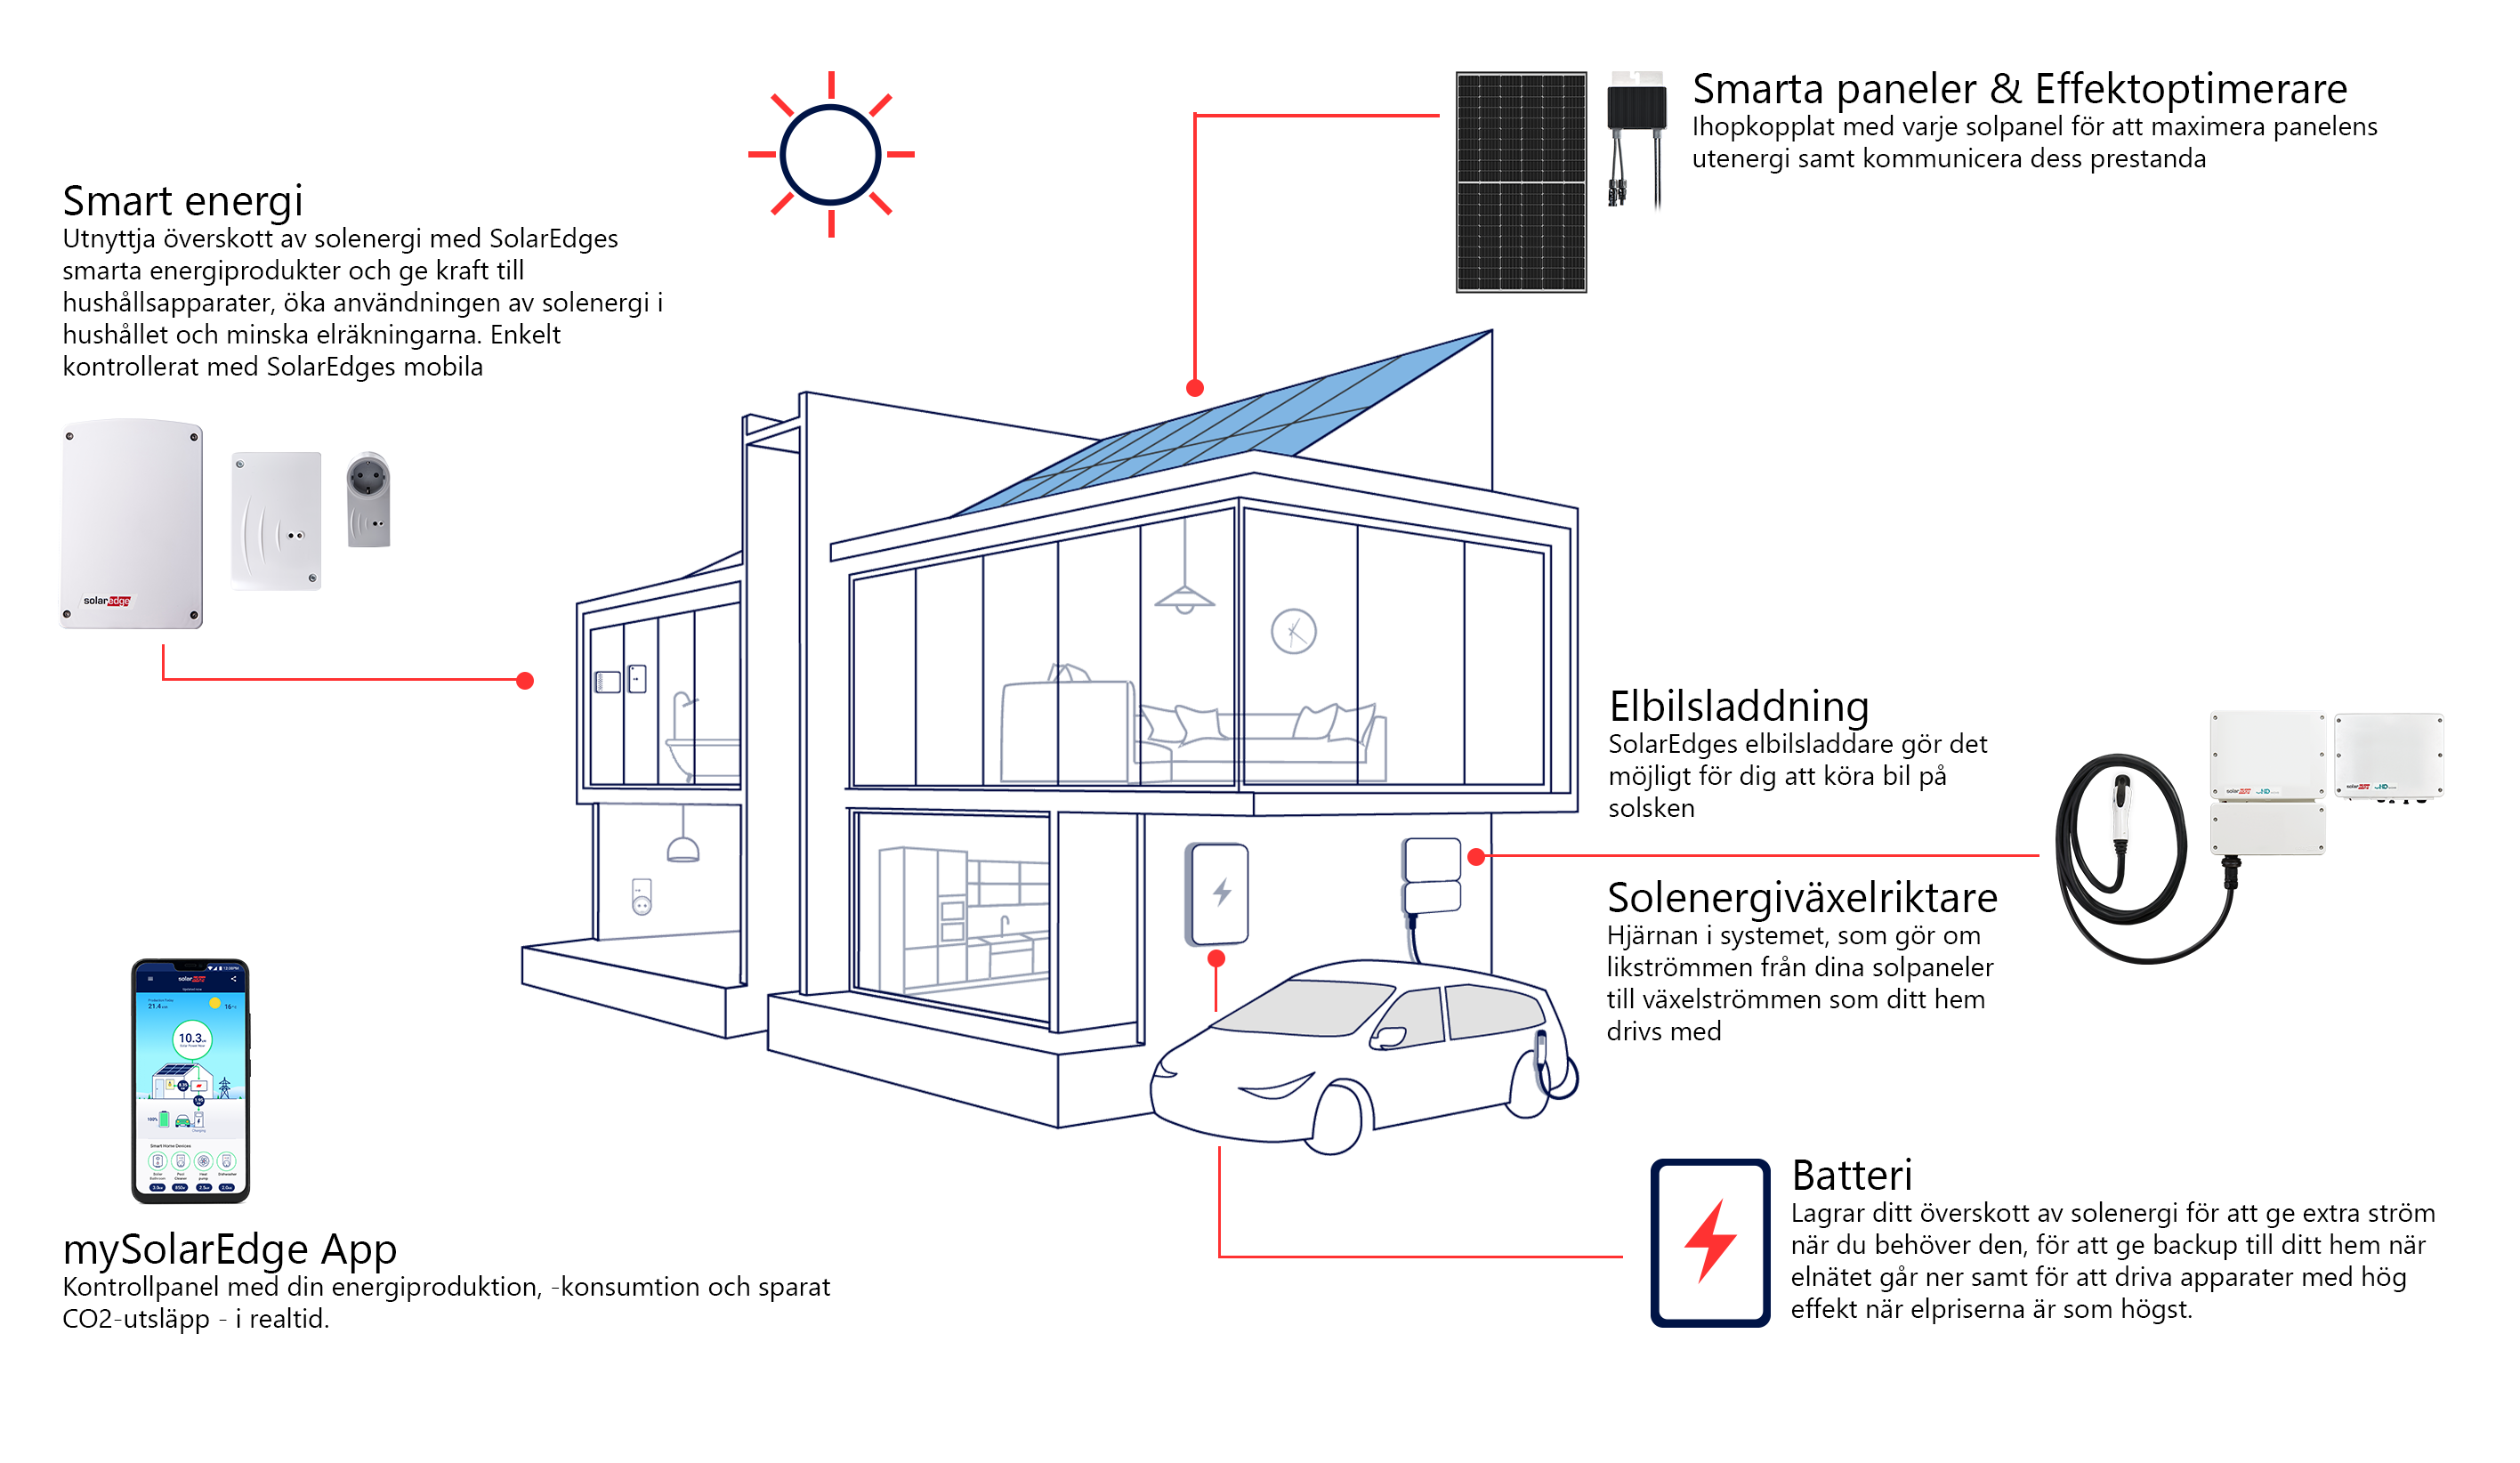 Introducing Your SolarEdge System